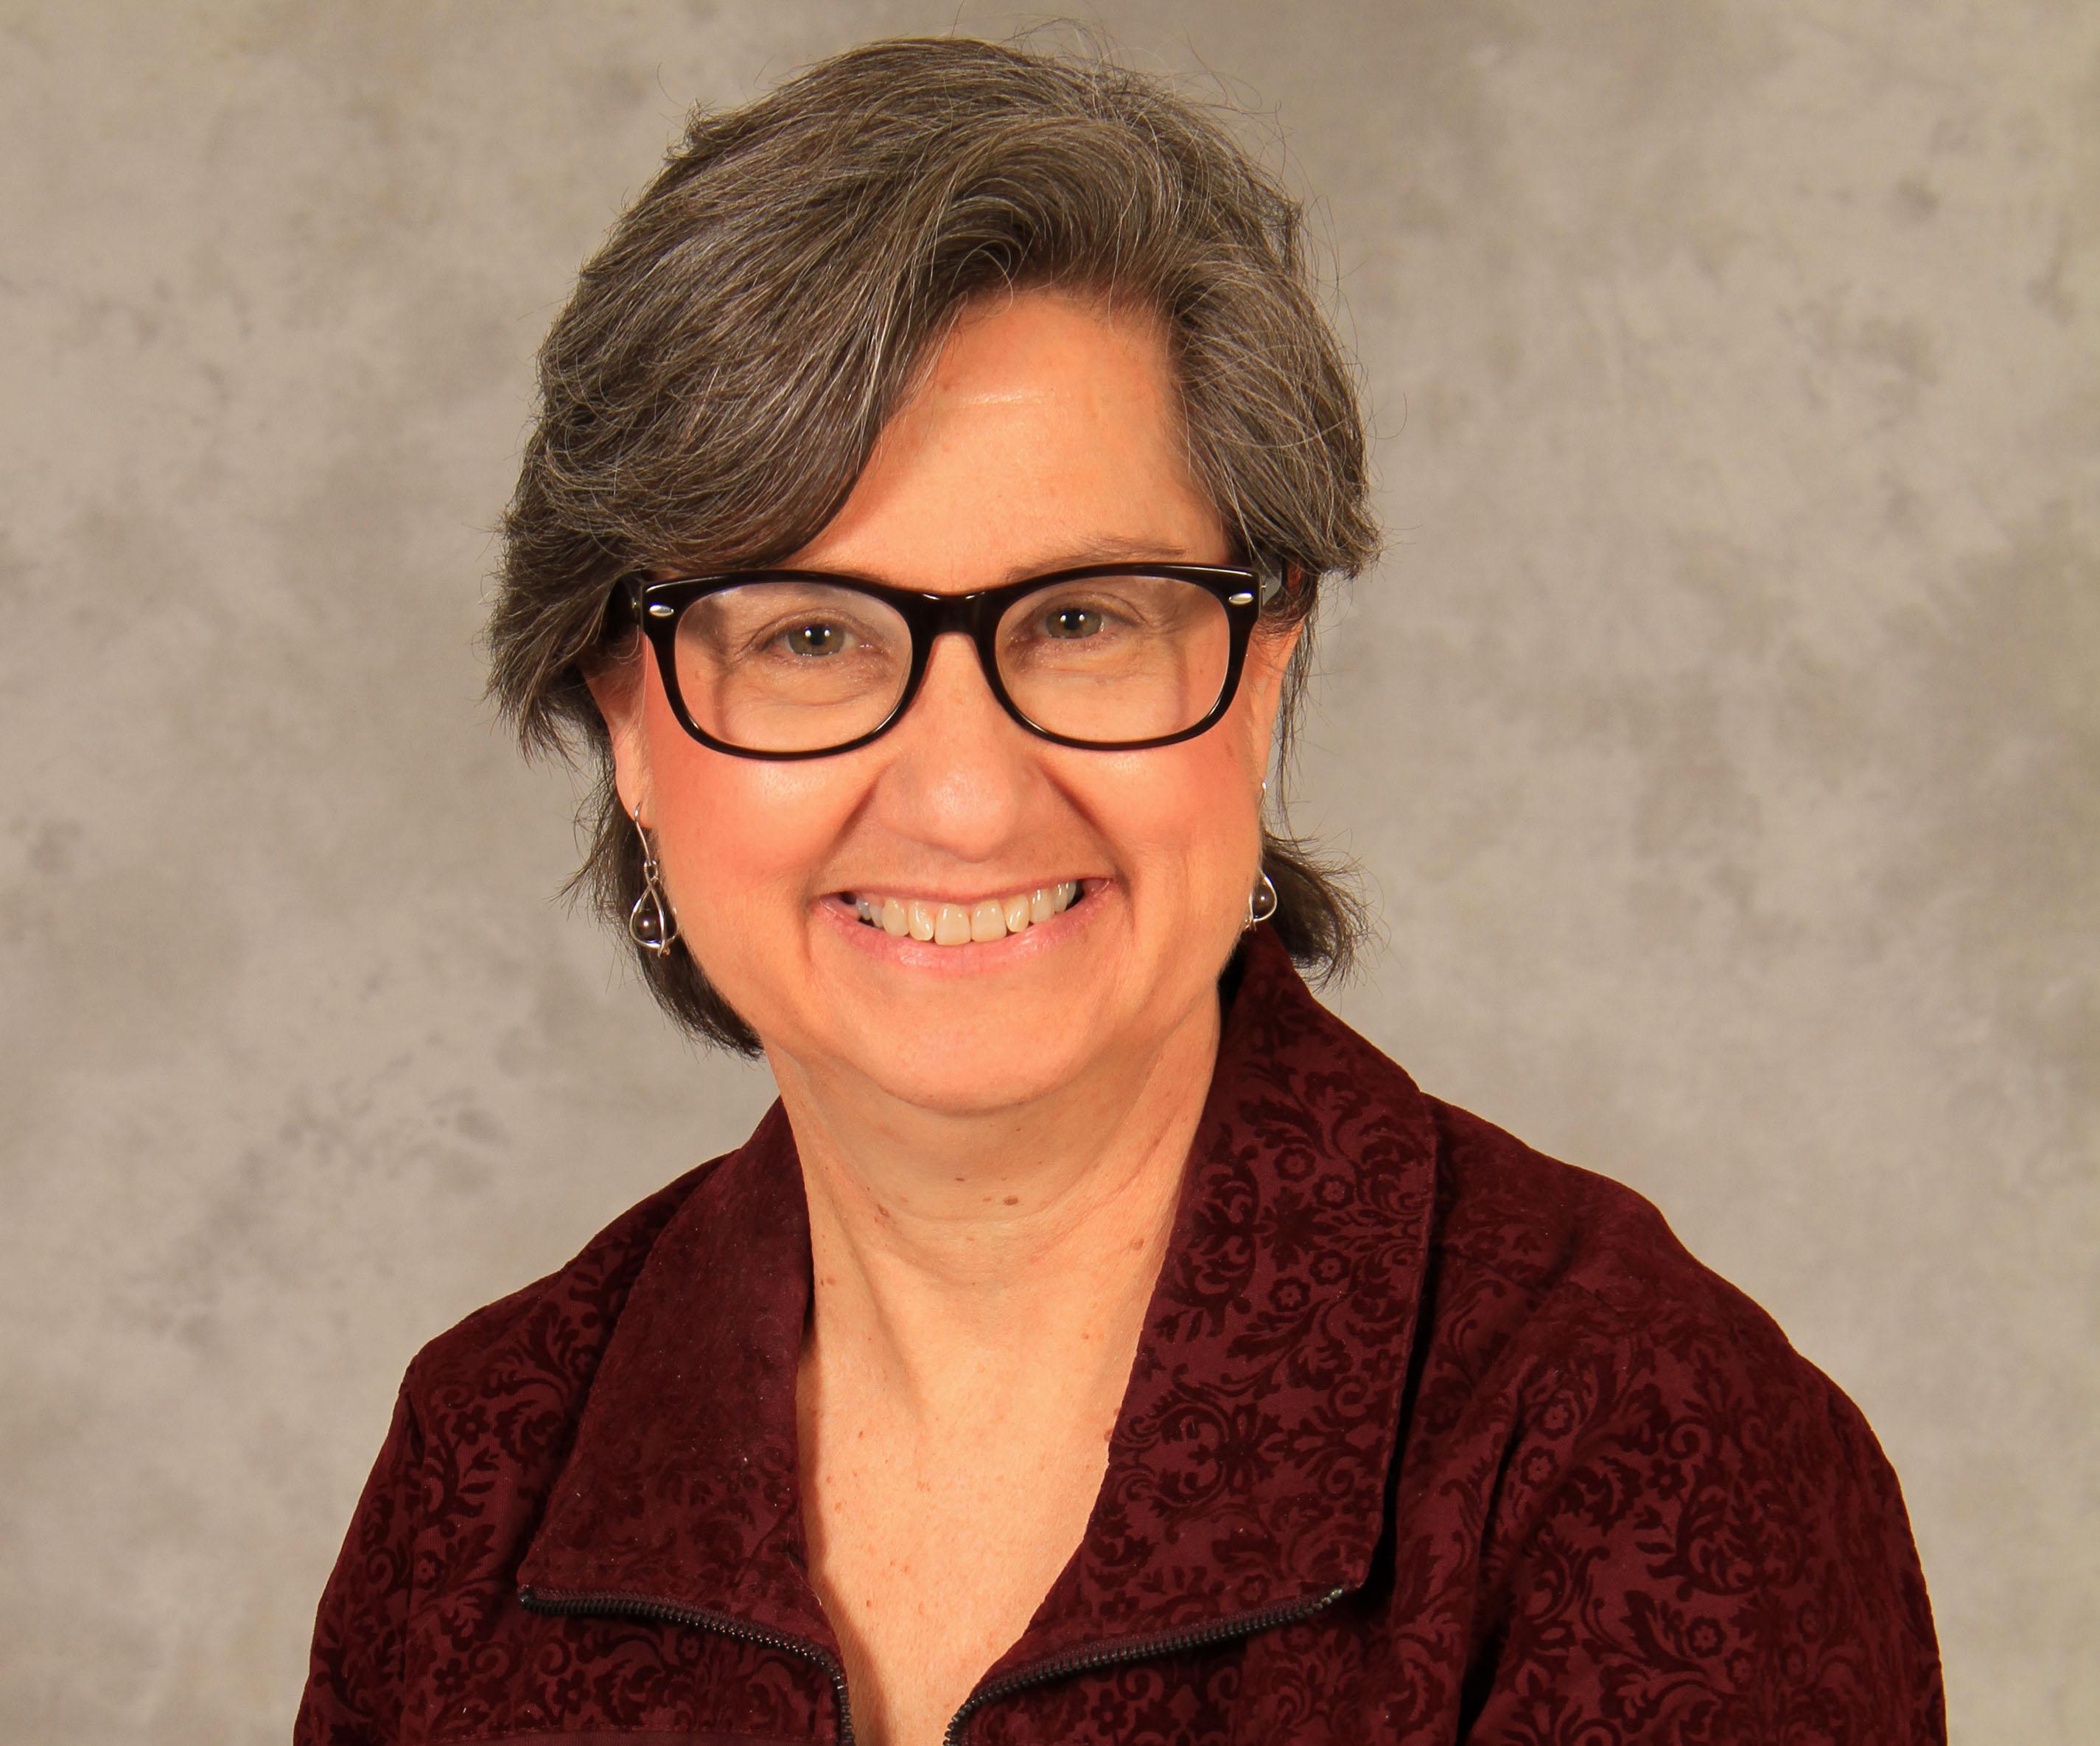 Deborah Furlong, Ph.D., new director of Institutional Research and Assessment at SUNY Oswego